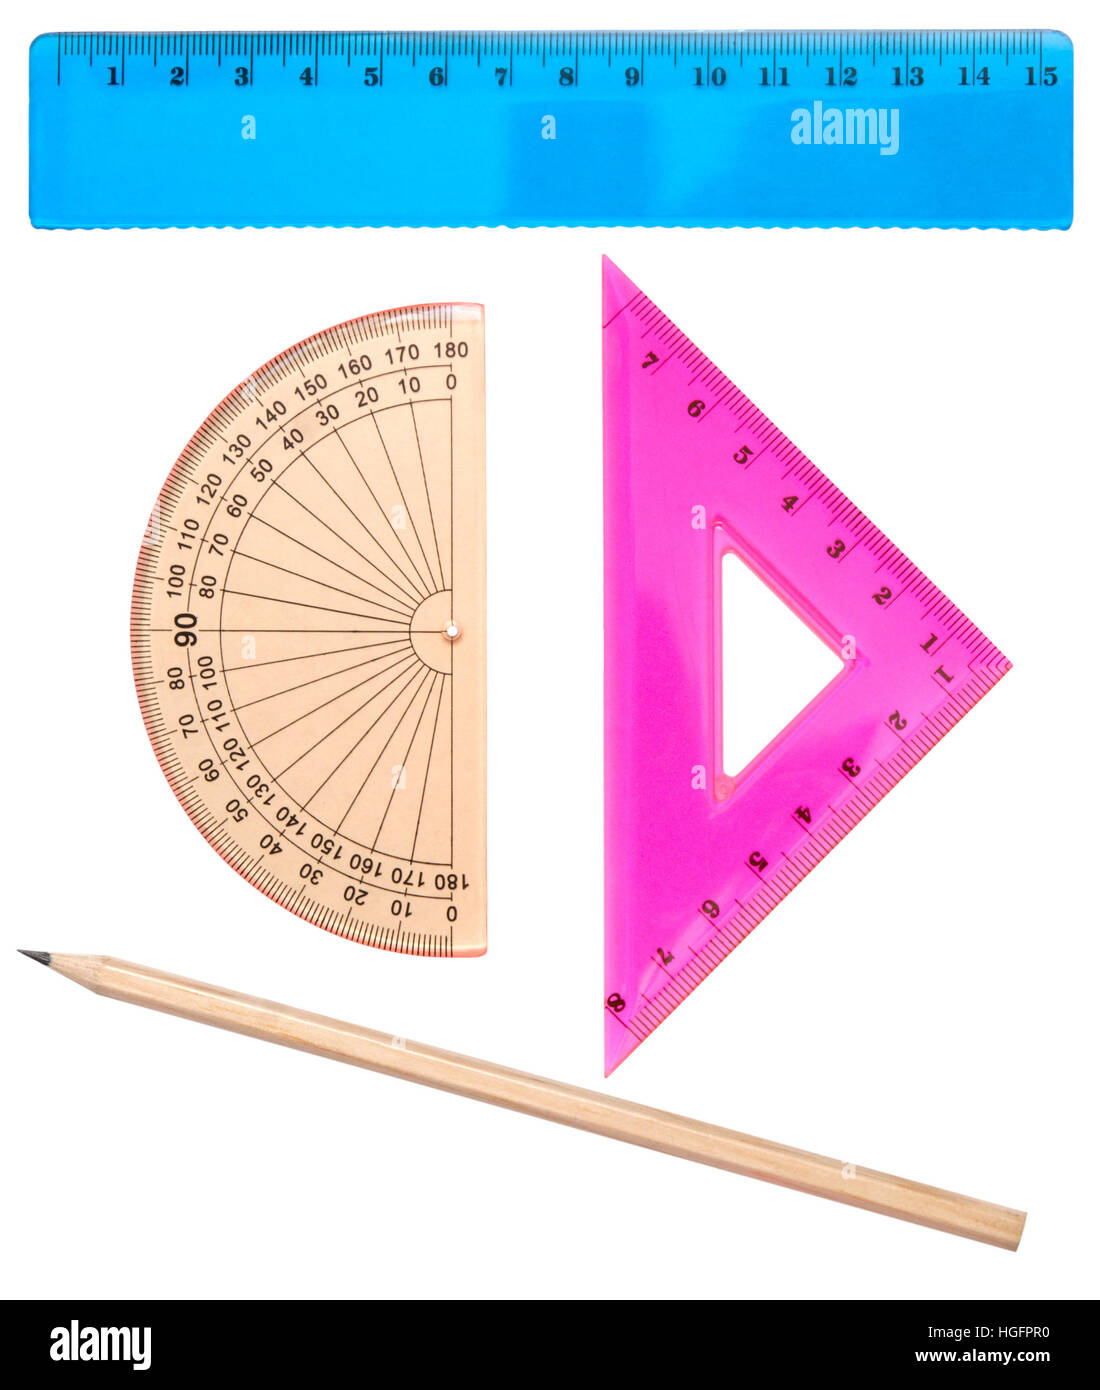 Architecture tools - Set of ruler, triangle and protractor on white  background Stock Photo - Alamy